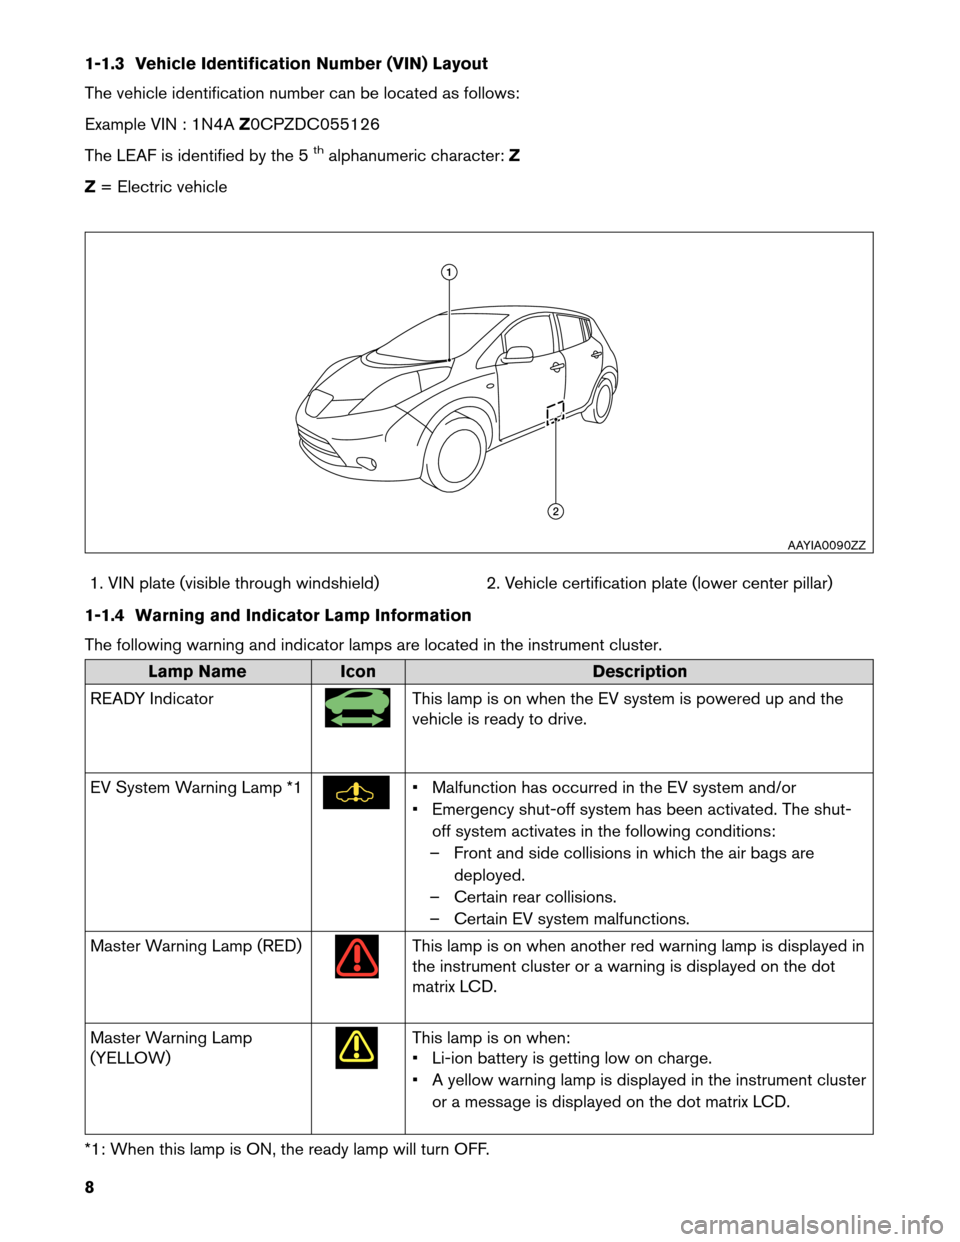 NISSAN LEAF 2013 1.G Roadside Assistance Guide 1-1.3 Vehicle Identification Number (VIN) Layout
The
vehicle identification number can be located as follows:
Example VIN : 1N4A Z0CPZDC055126
The LEAF is identified by the 5
thalphanumeric character: